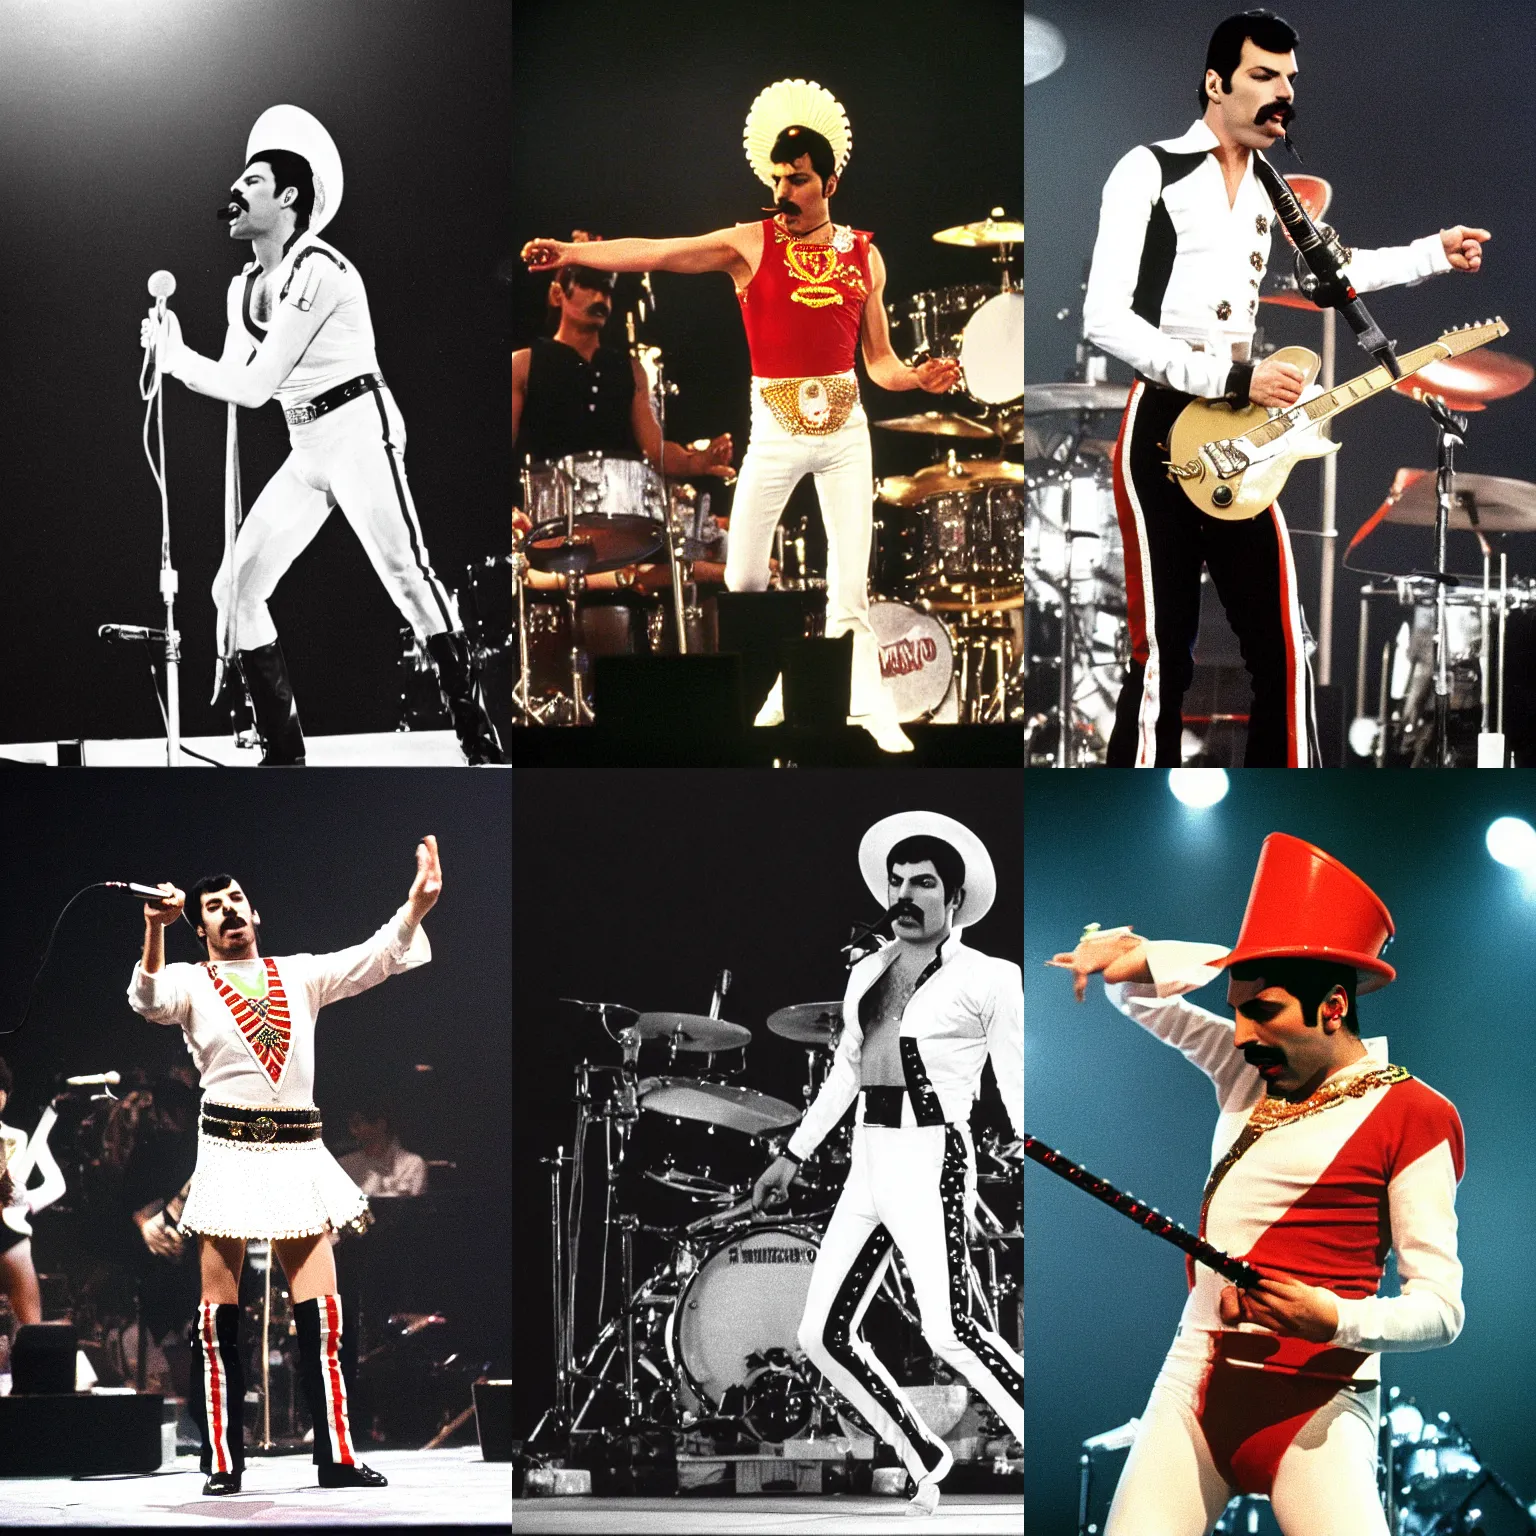 Prompt: Freddie Mercury wearing a Mexican sombrero on stage, live Wembley 1986, live concert photography, high quality